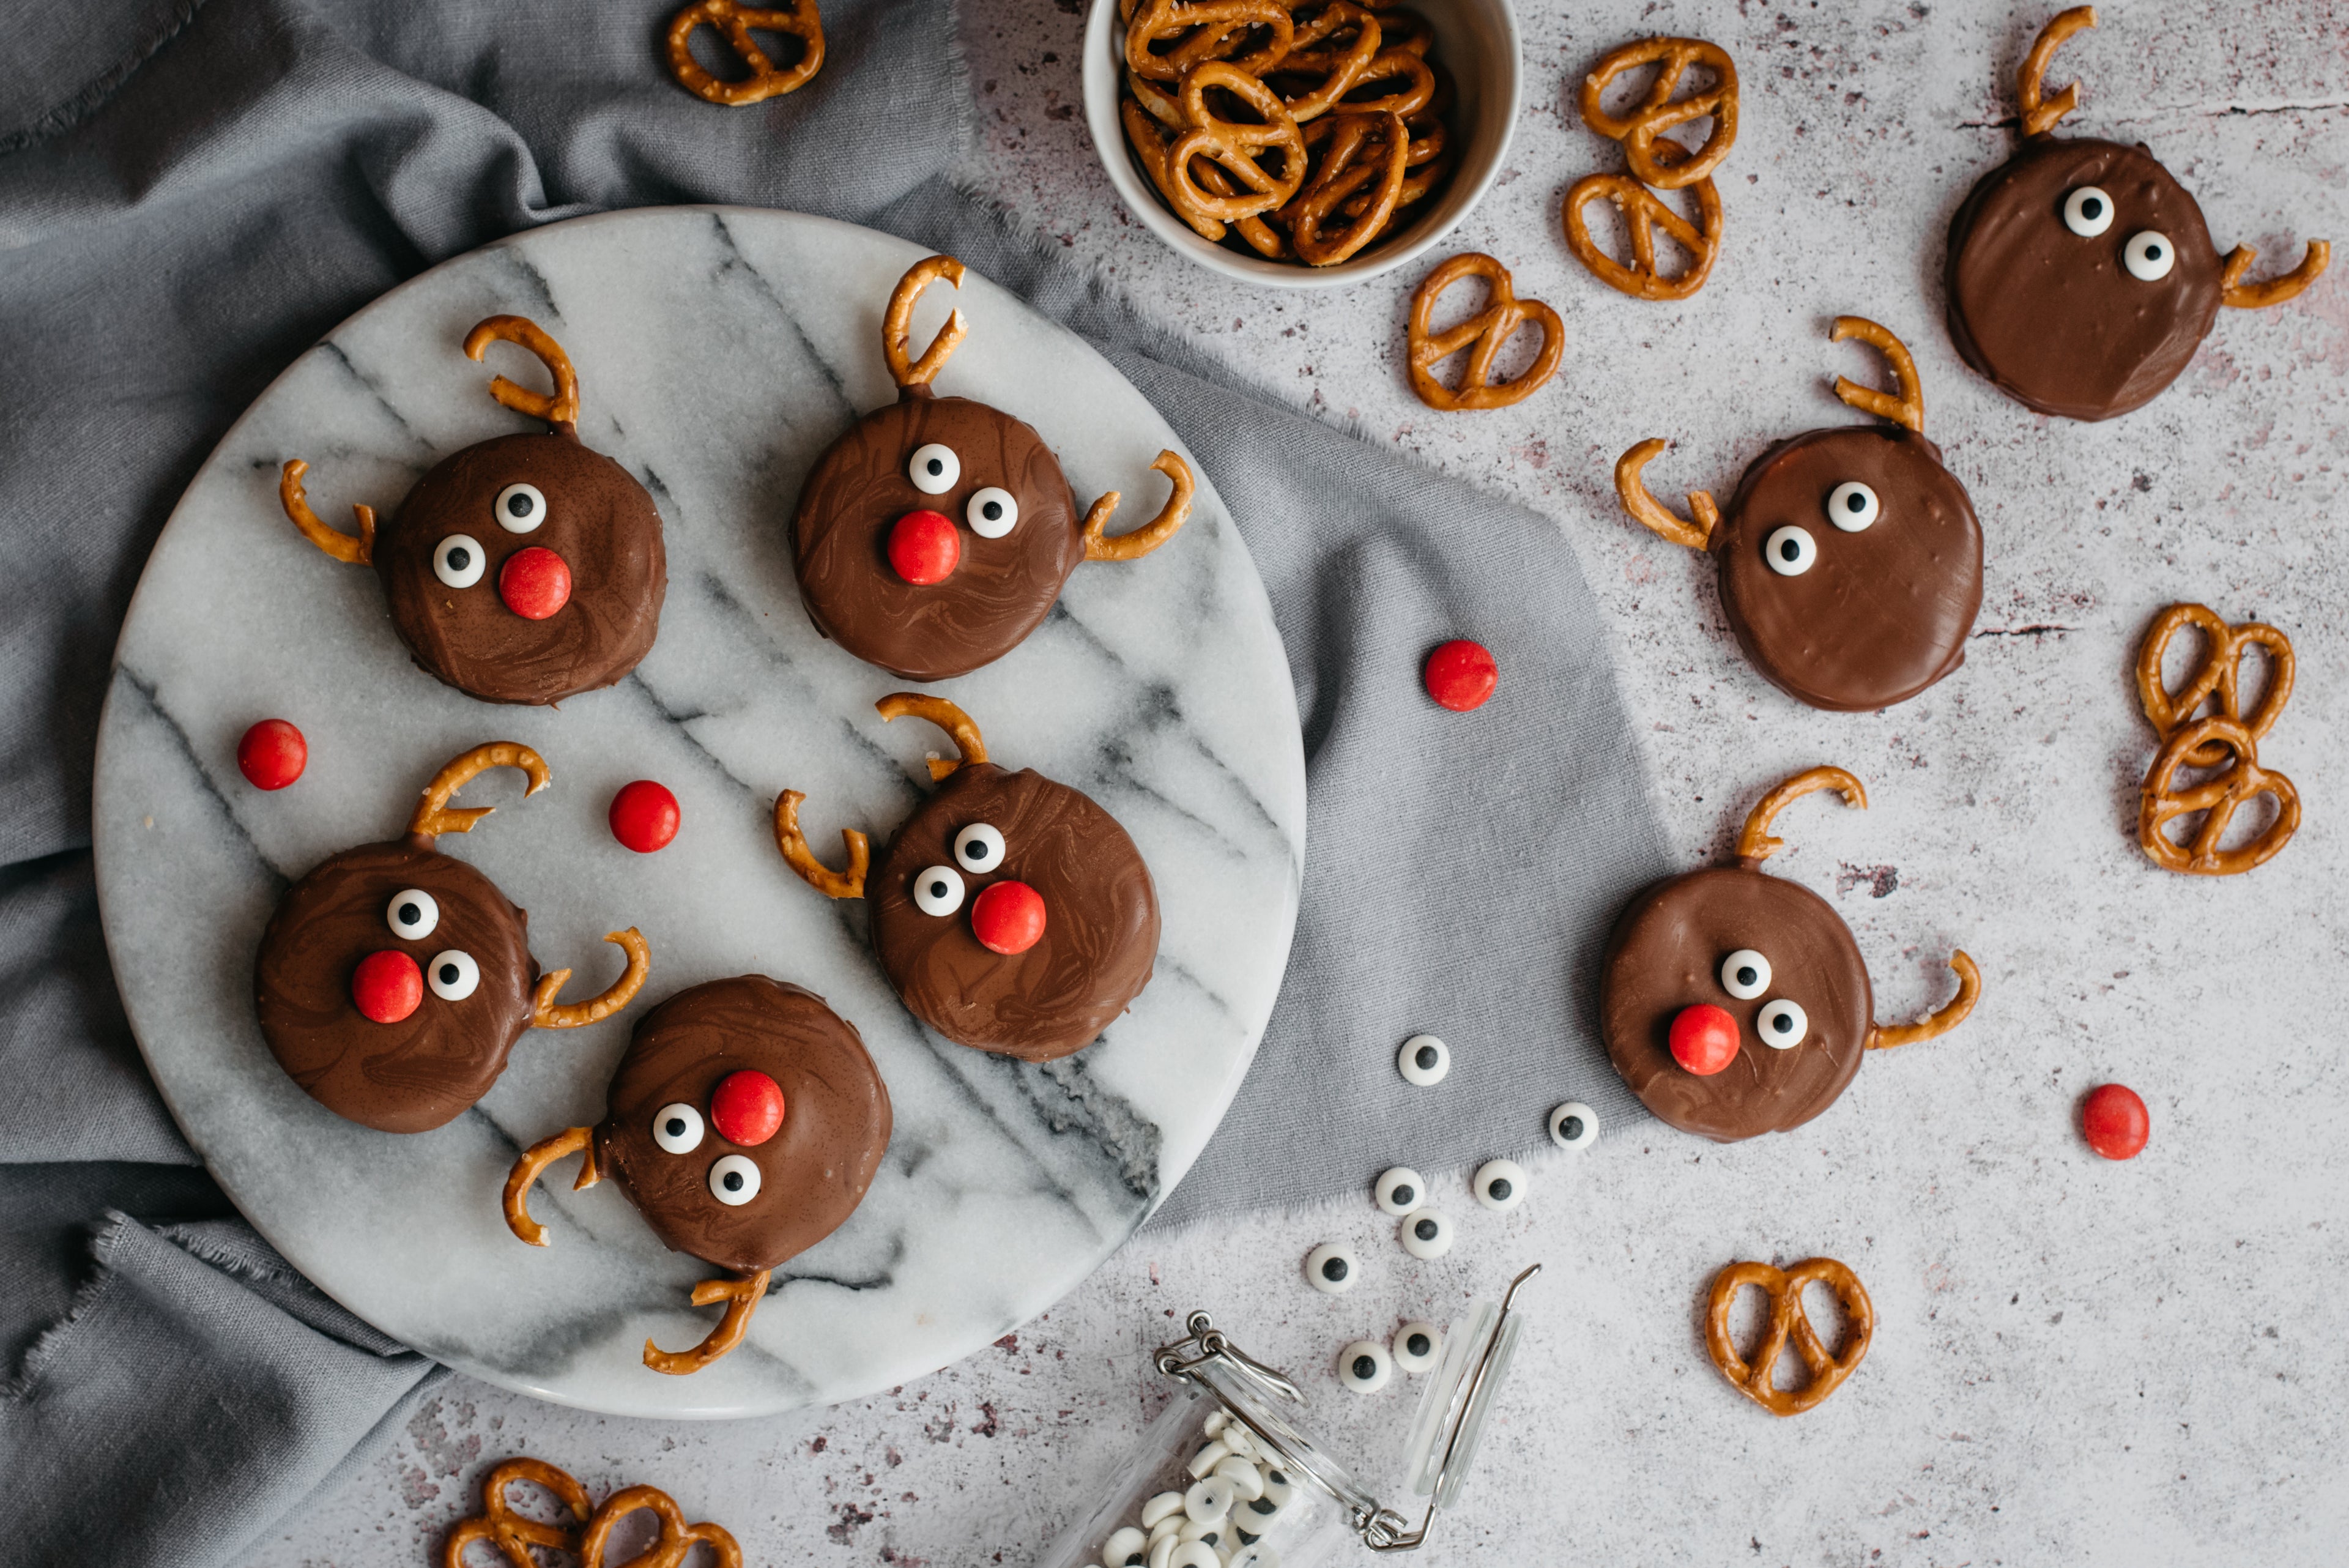 Top view of Reindeer Orange Creams decorated with broken pretzels and icing eyes on a marble serving board